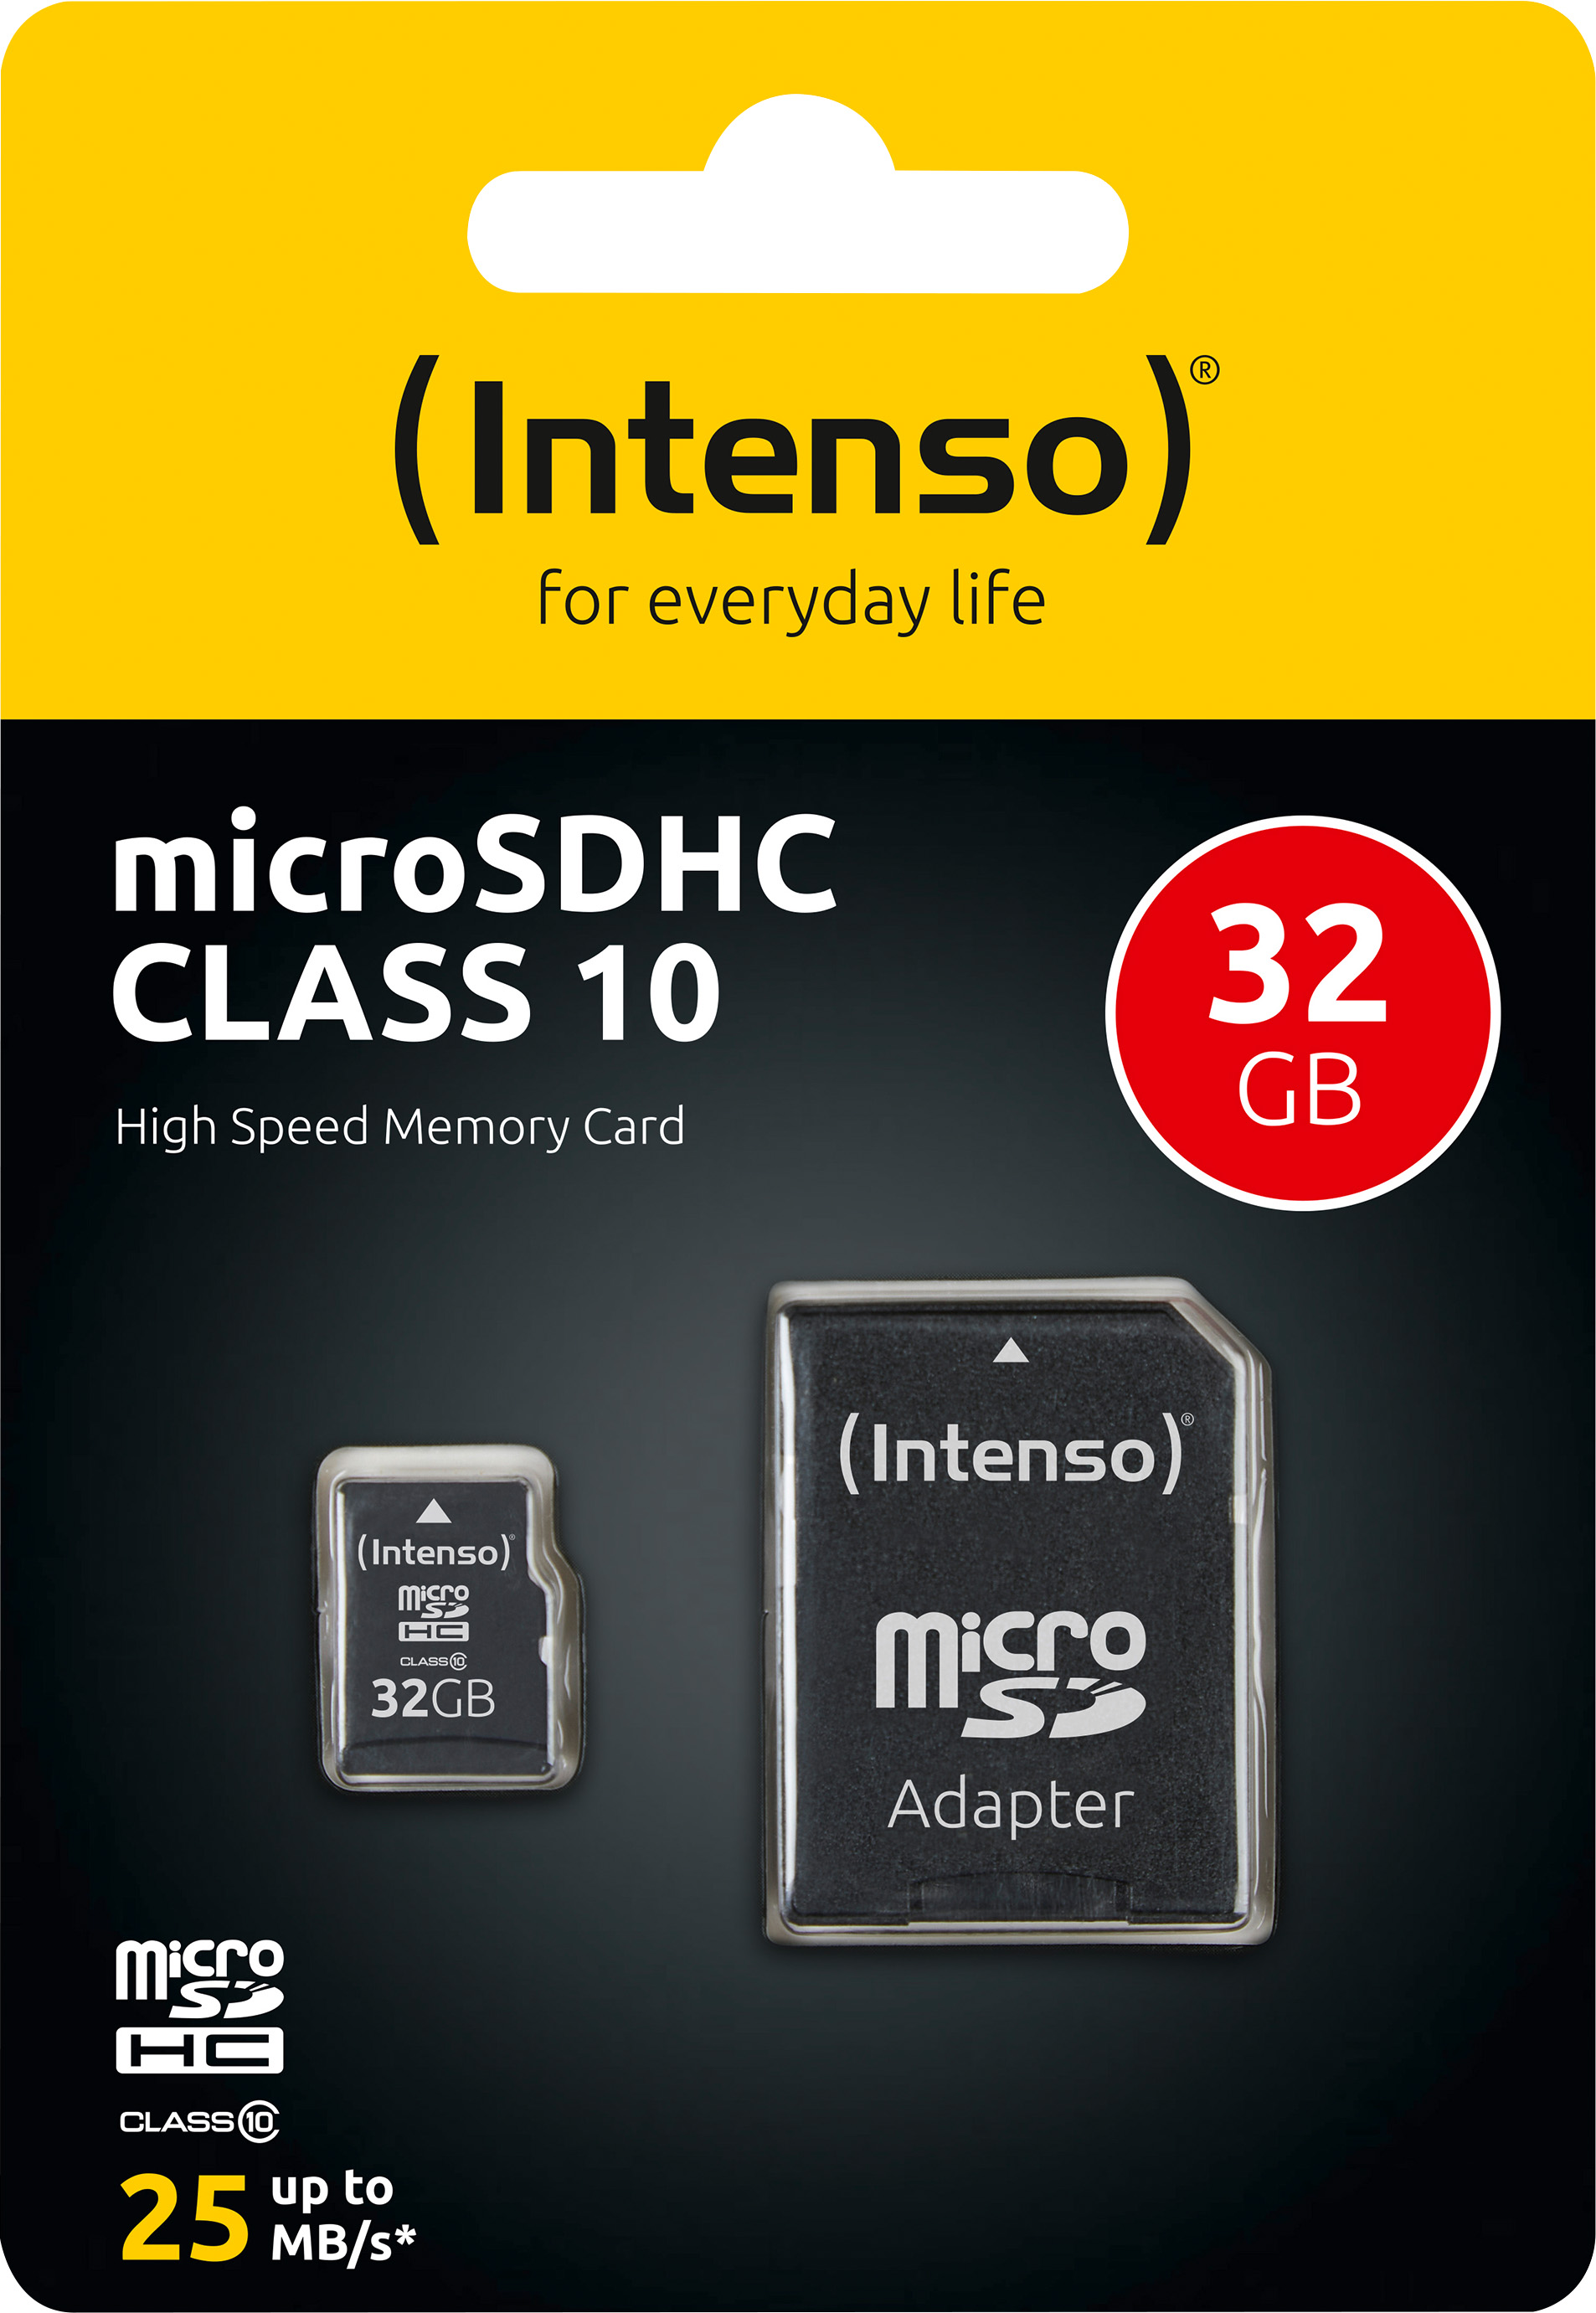 Intenso microSDHC Card 32GB, Class 10 (R) 25MB/s, (W) 10MB/s, SD-Adapter, Retail-Blister